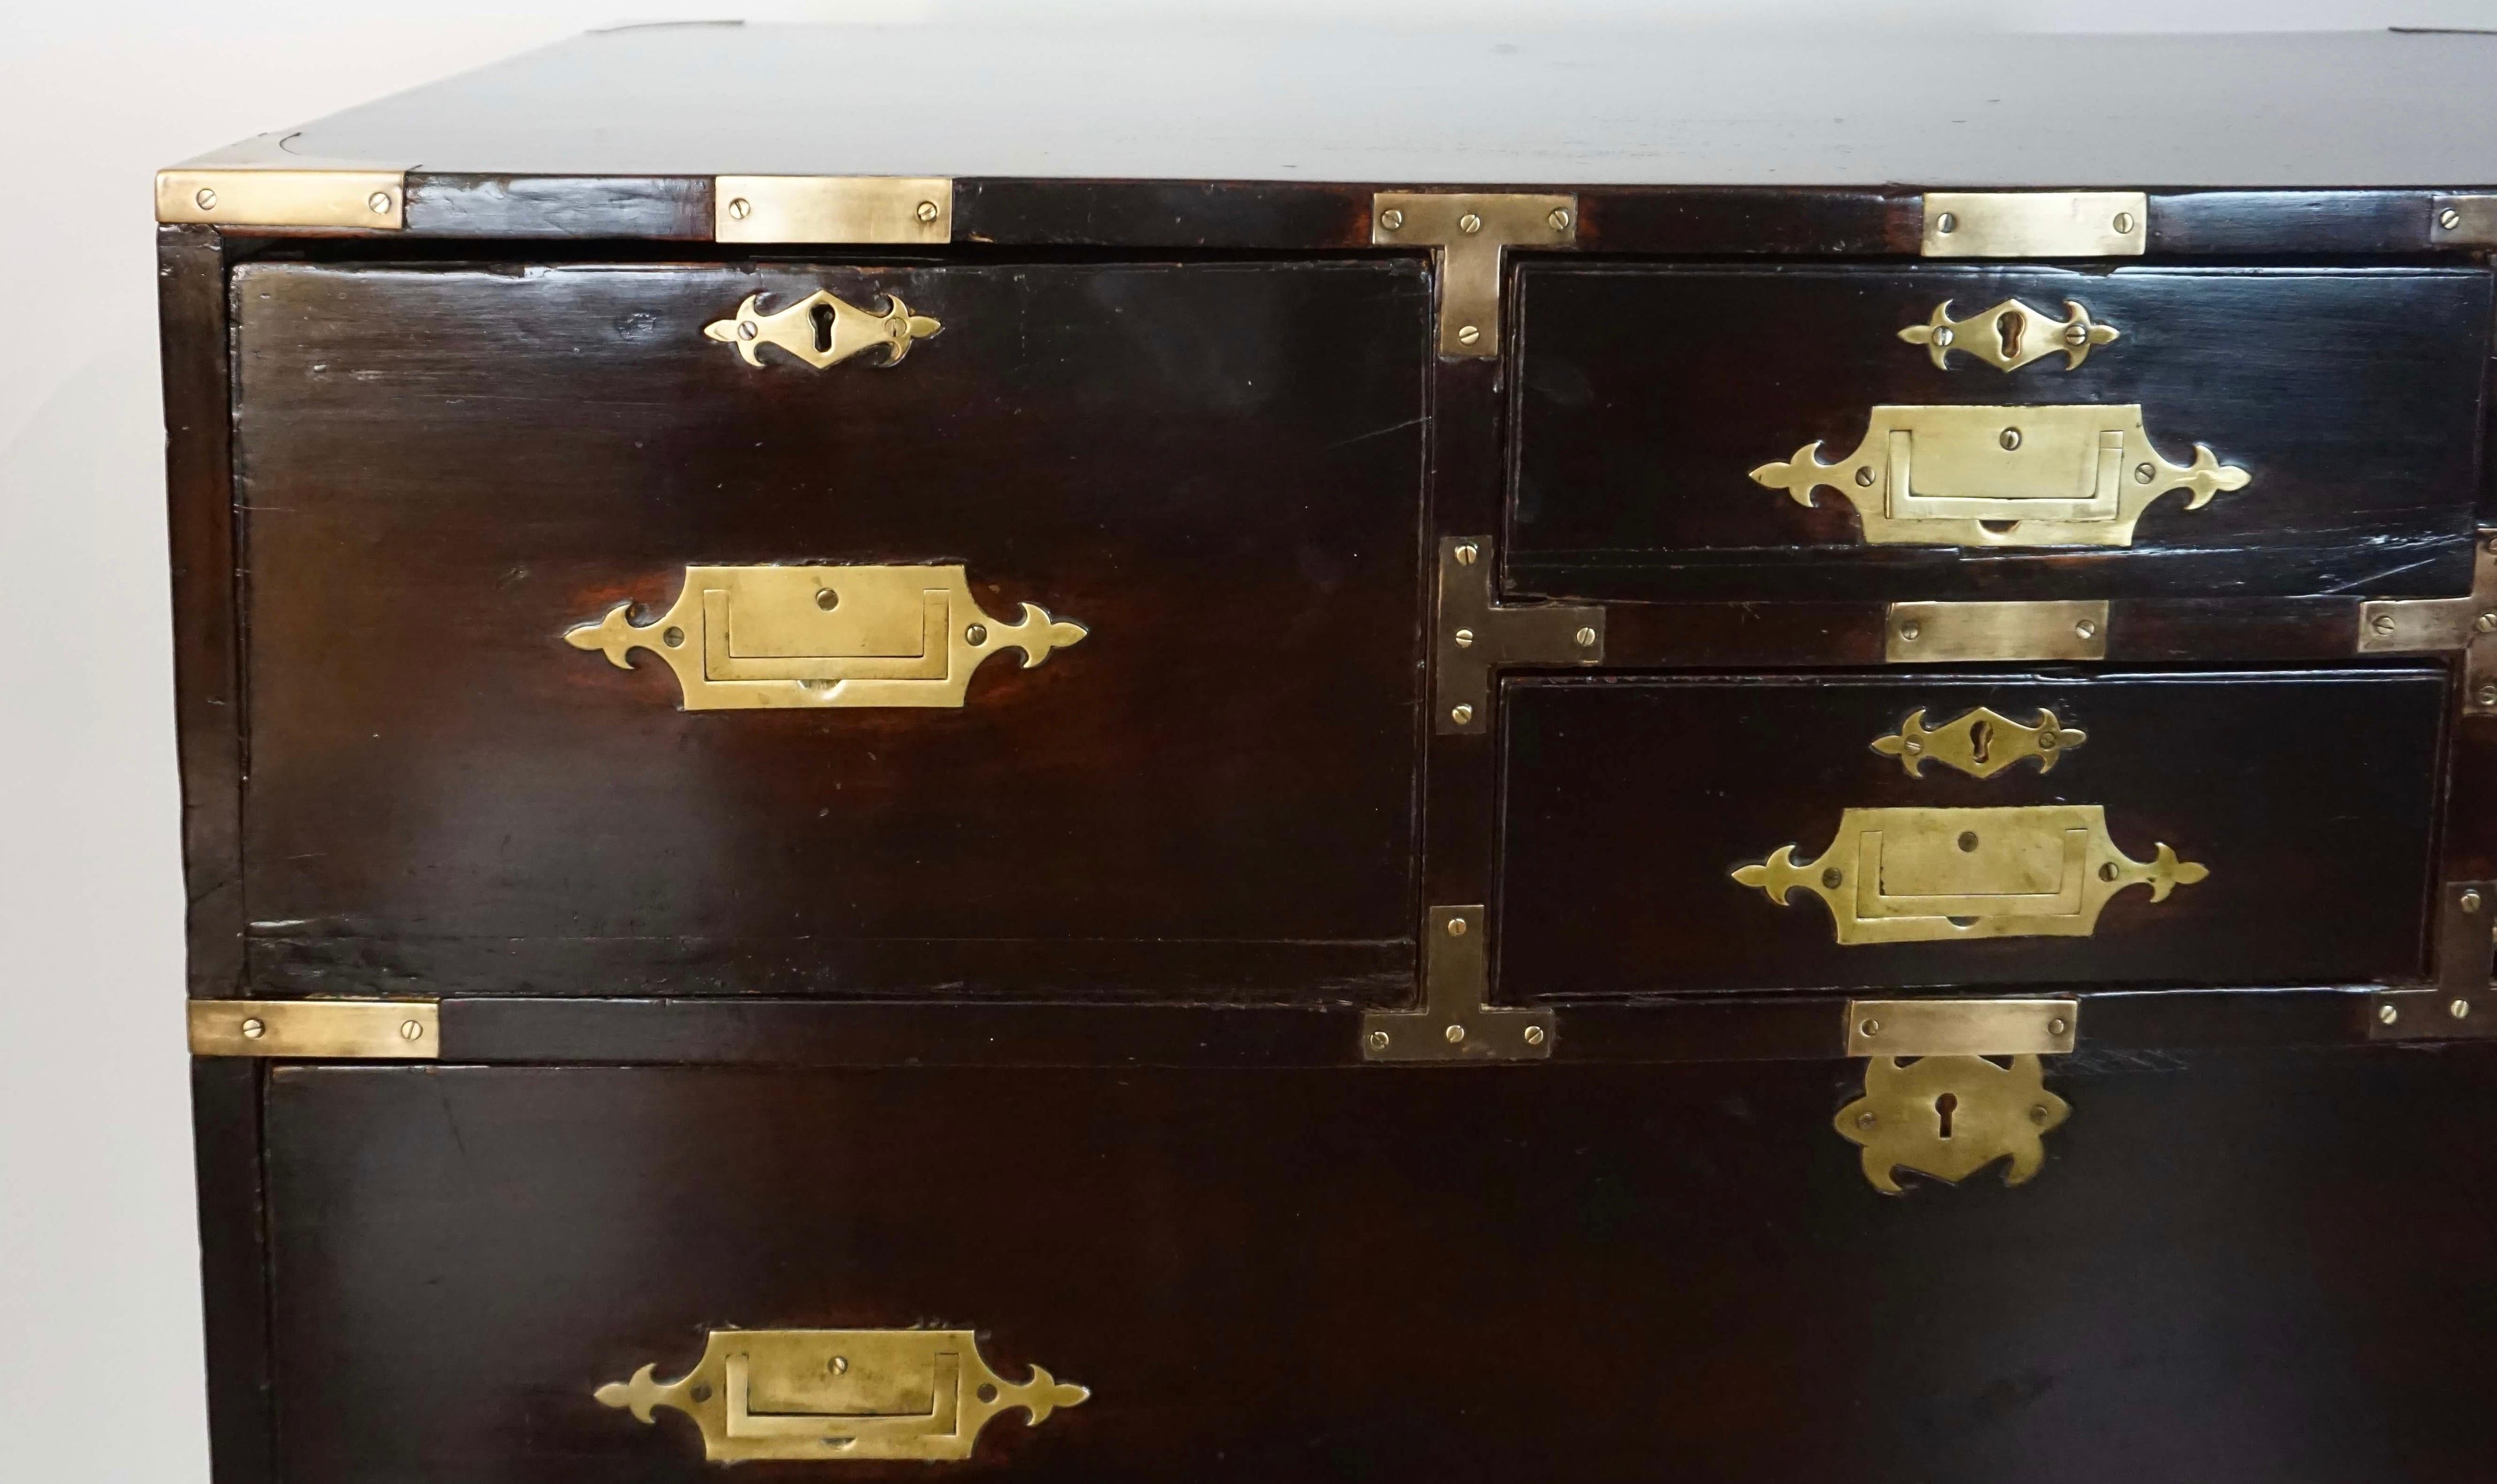 Second quarter 19th century British colonial campaign chest of seven drawers in two parts constructed of solid teak with original ebonized finish and brass hardware atop later platform stand base. A phenomenal example of considerable size and weight.